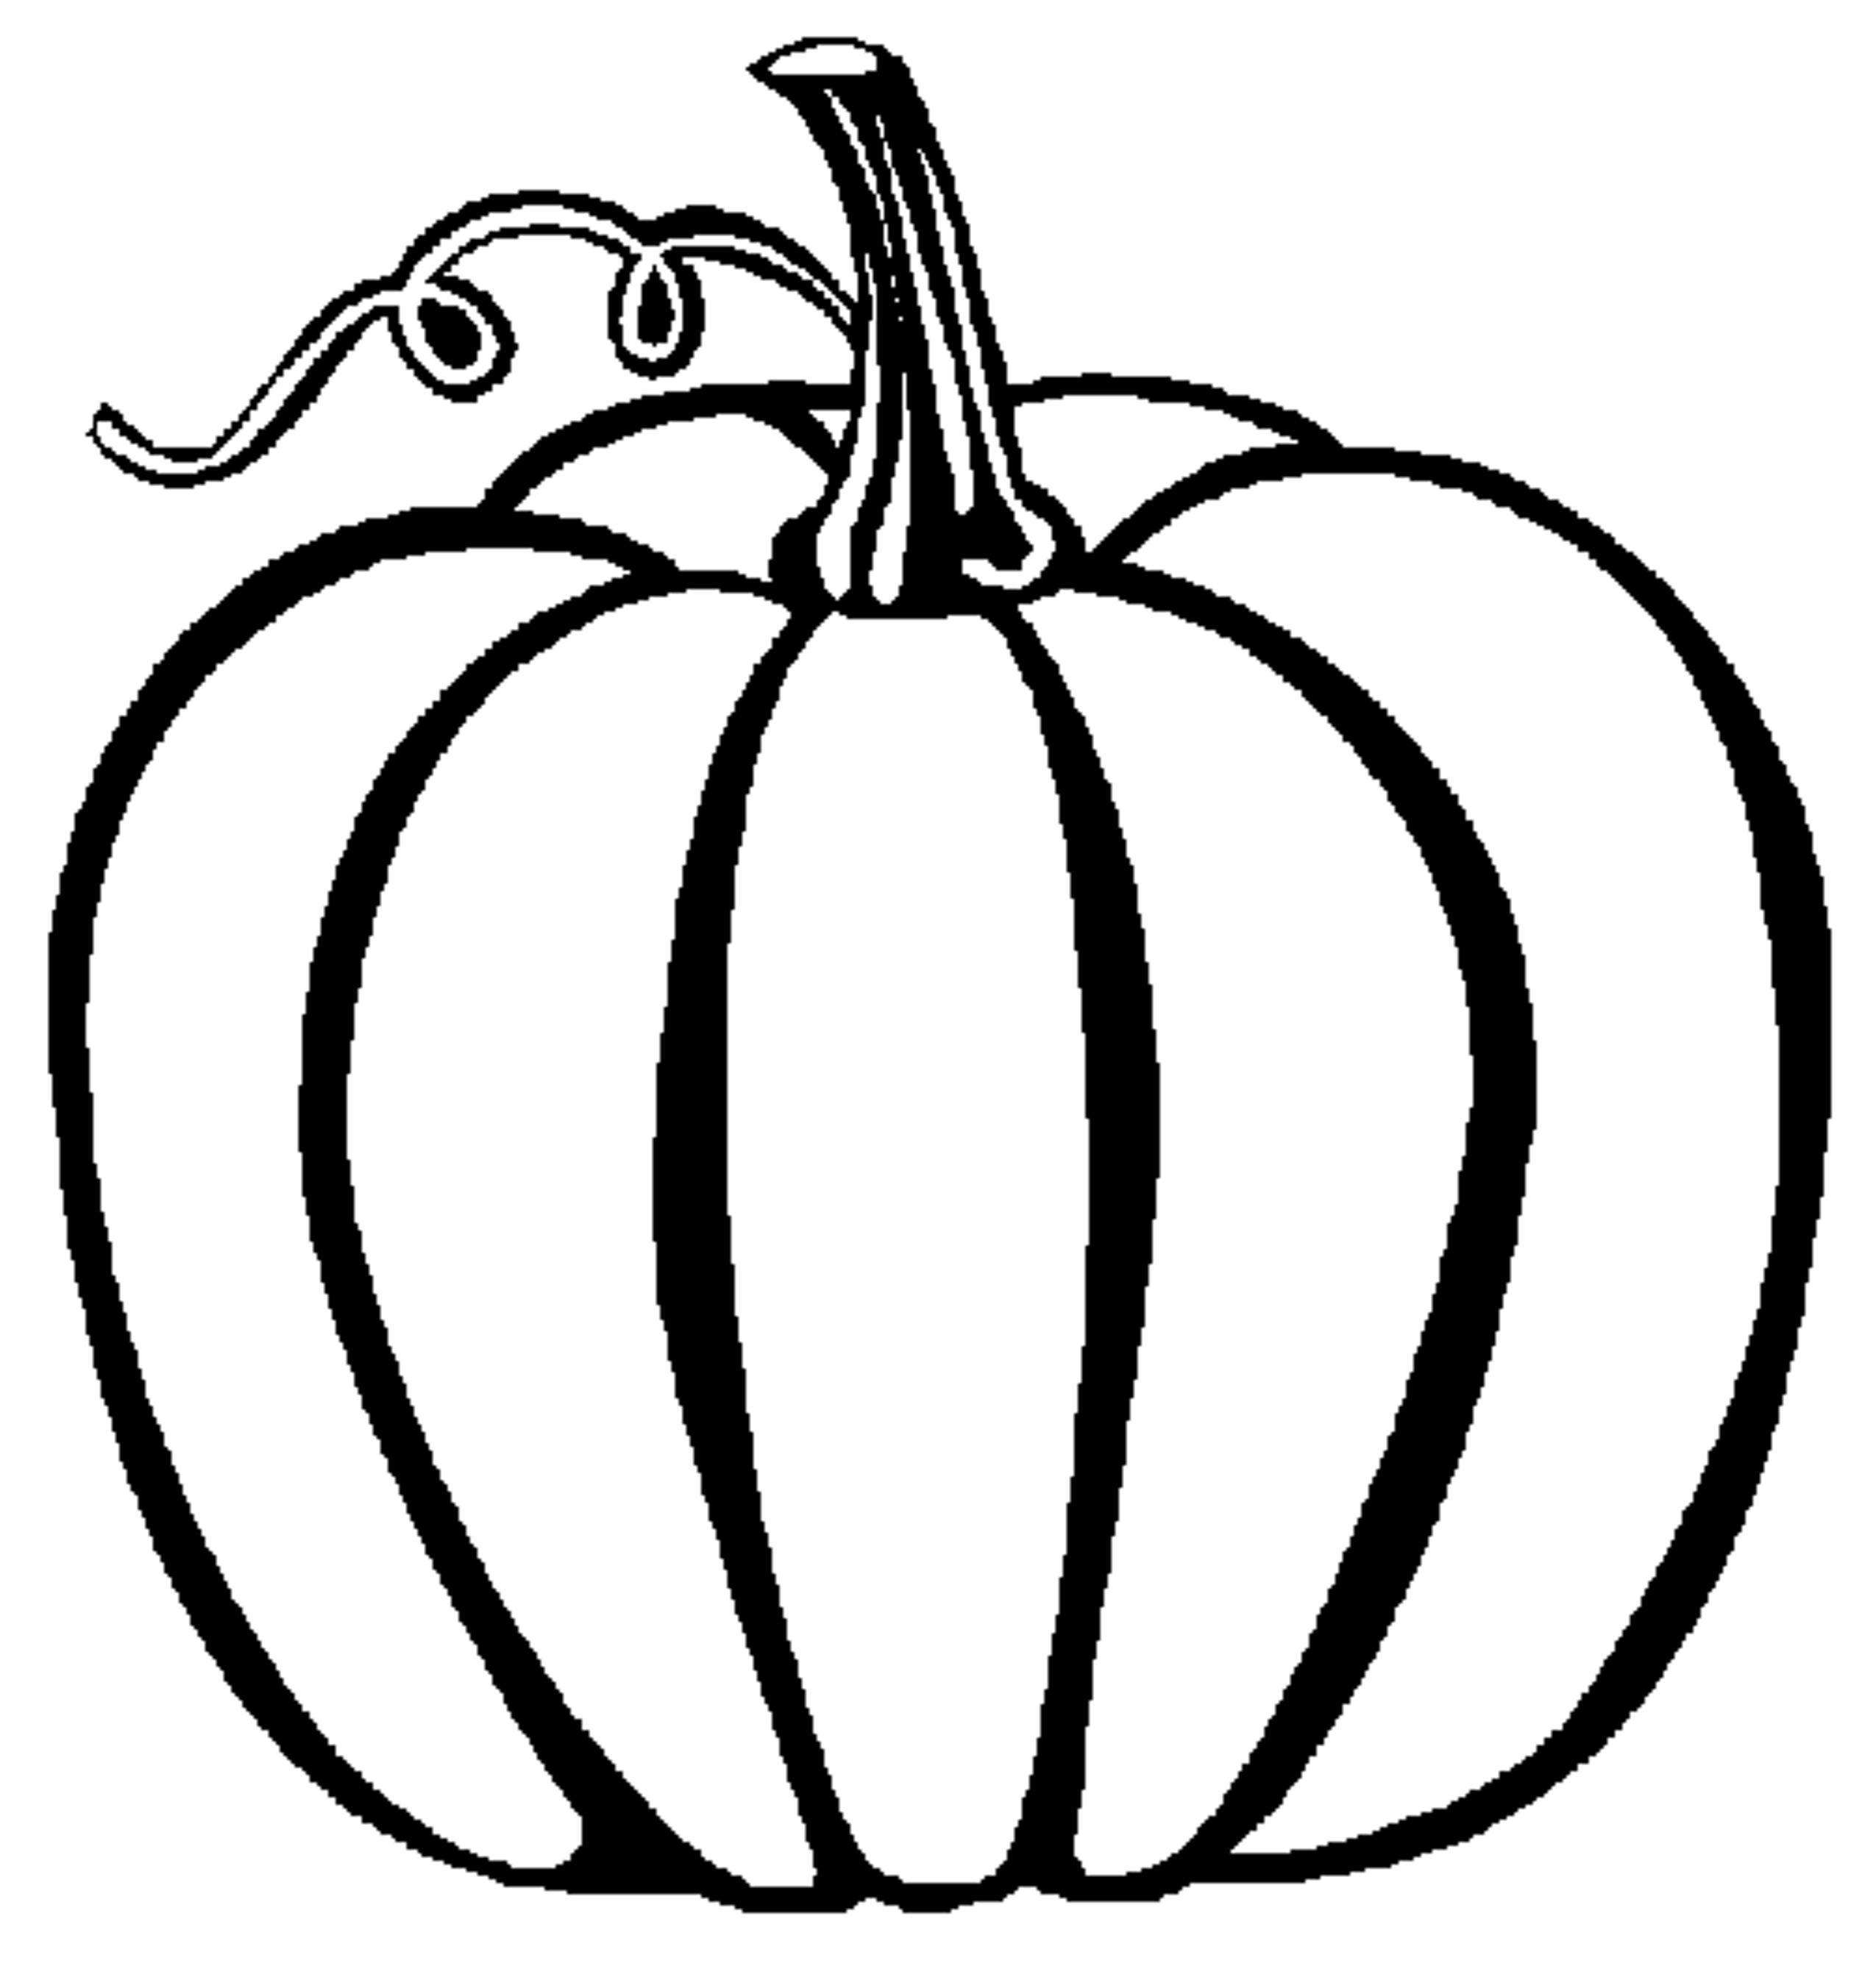 Pumpkin Patch Coloring Pages Printable - Coloring Home